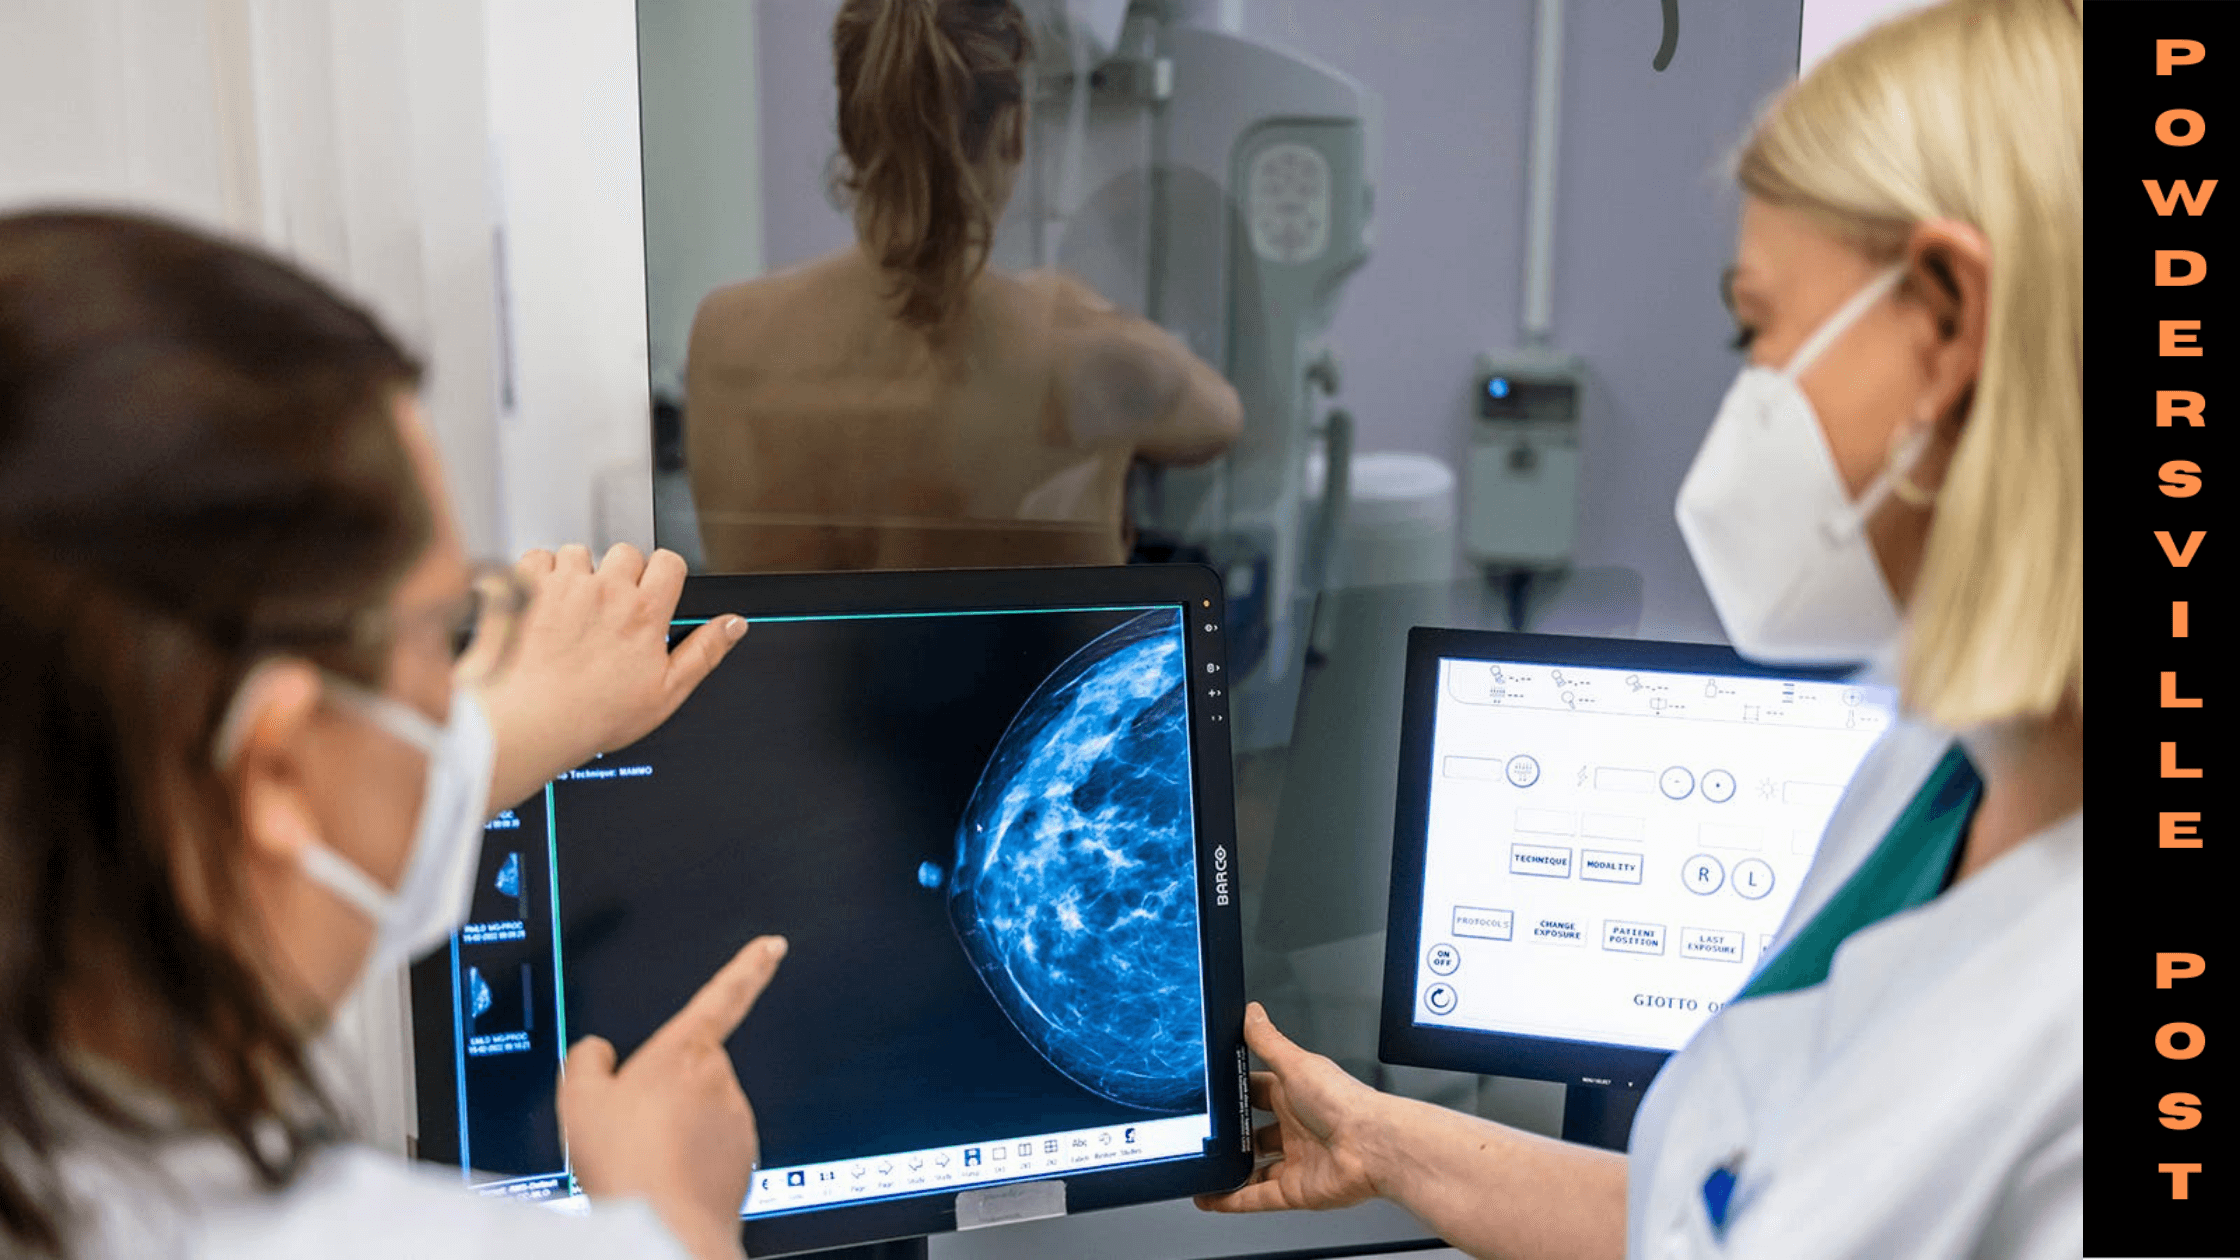 New Reports Suggest Breast Cancer Is Overdiagnosed